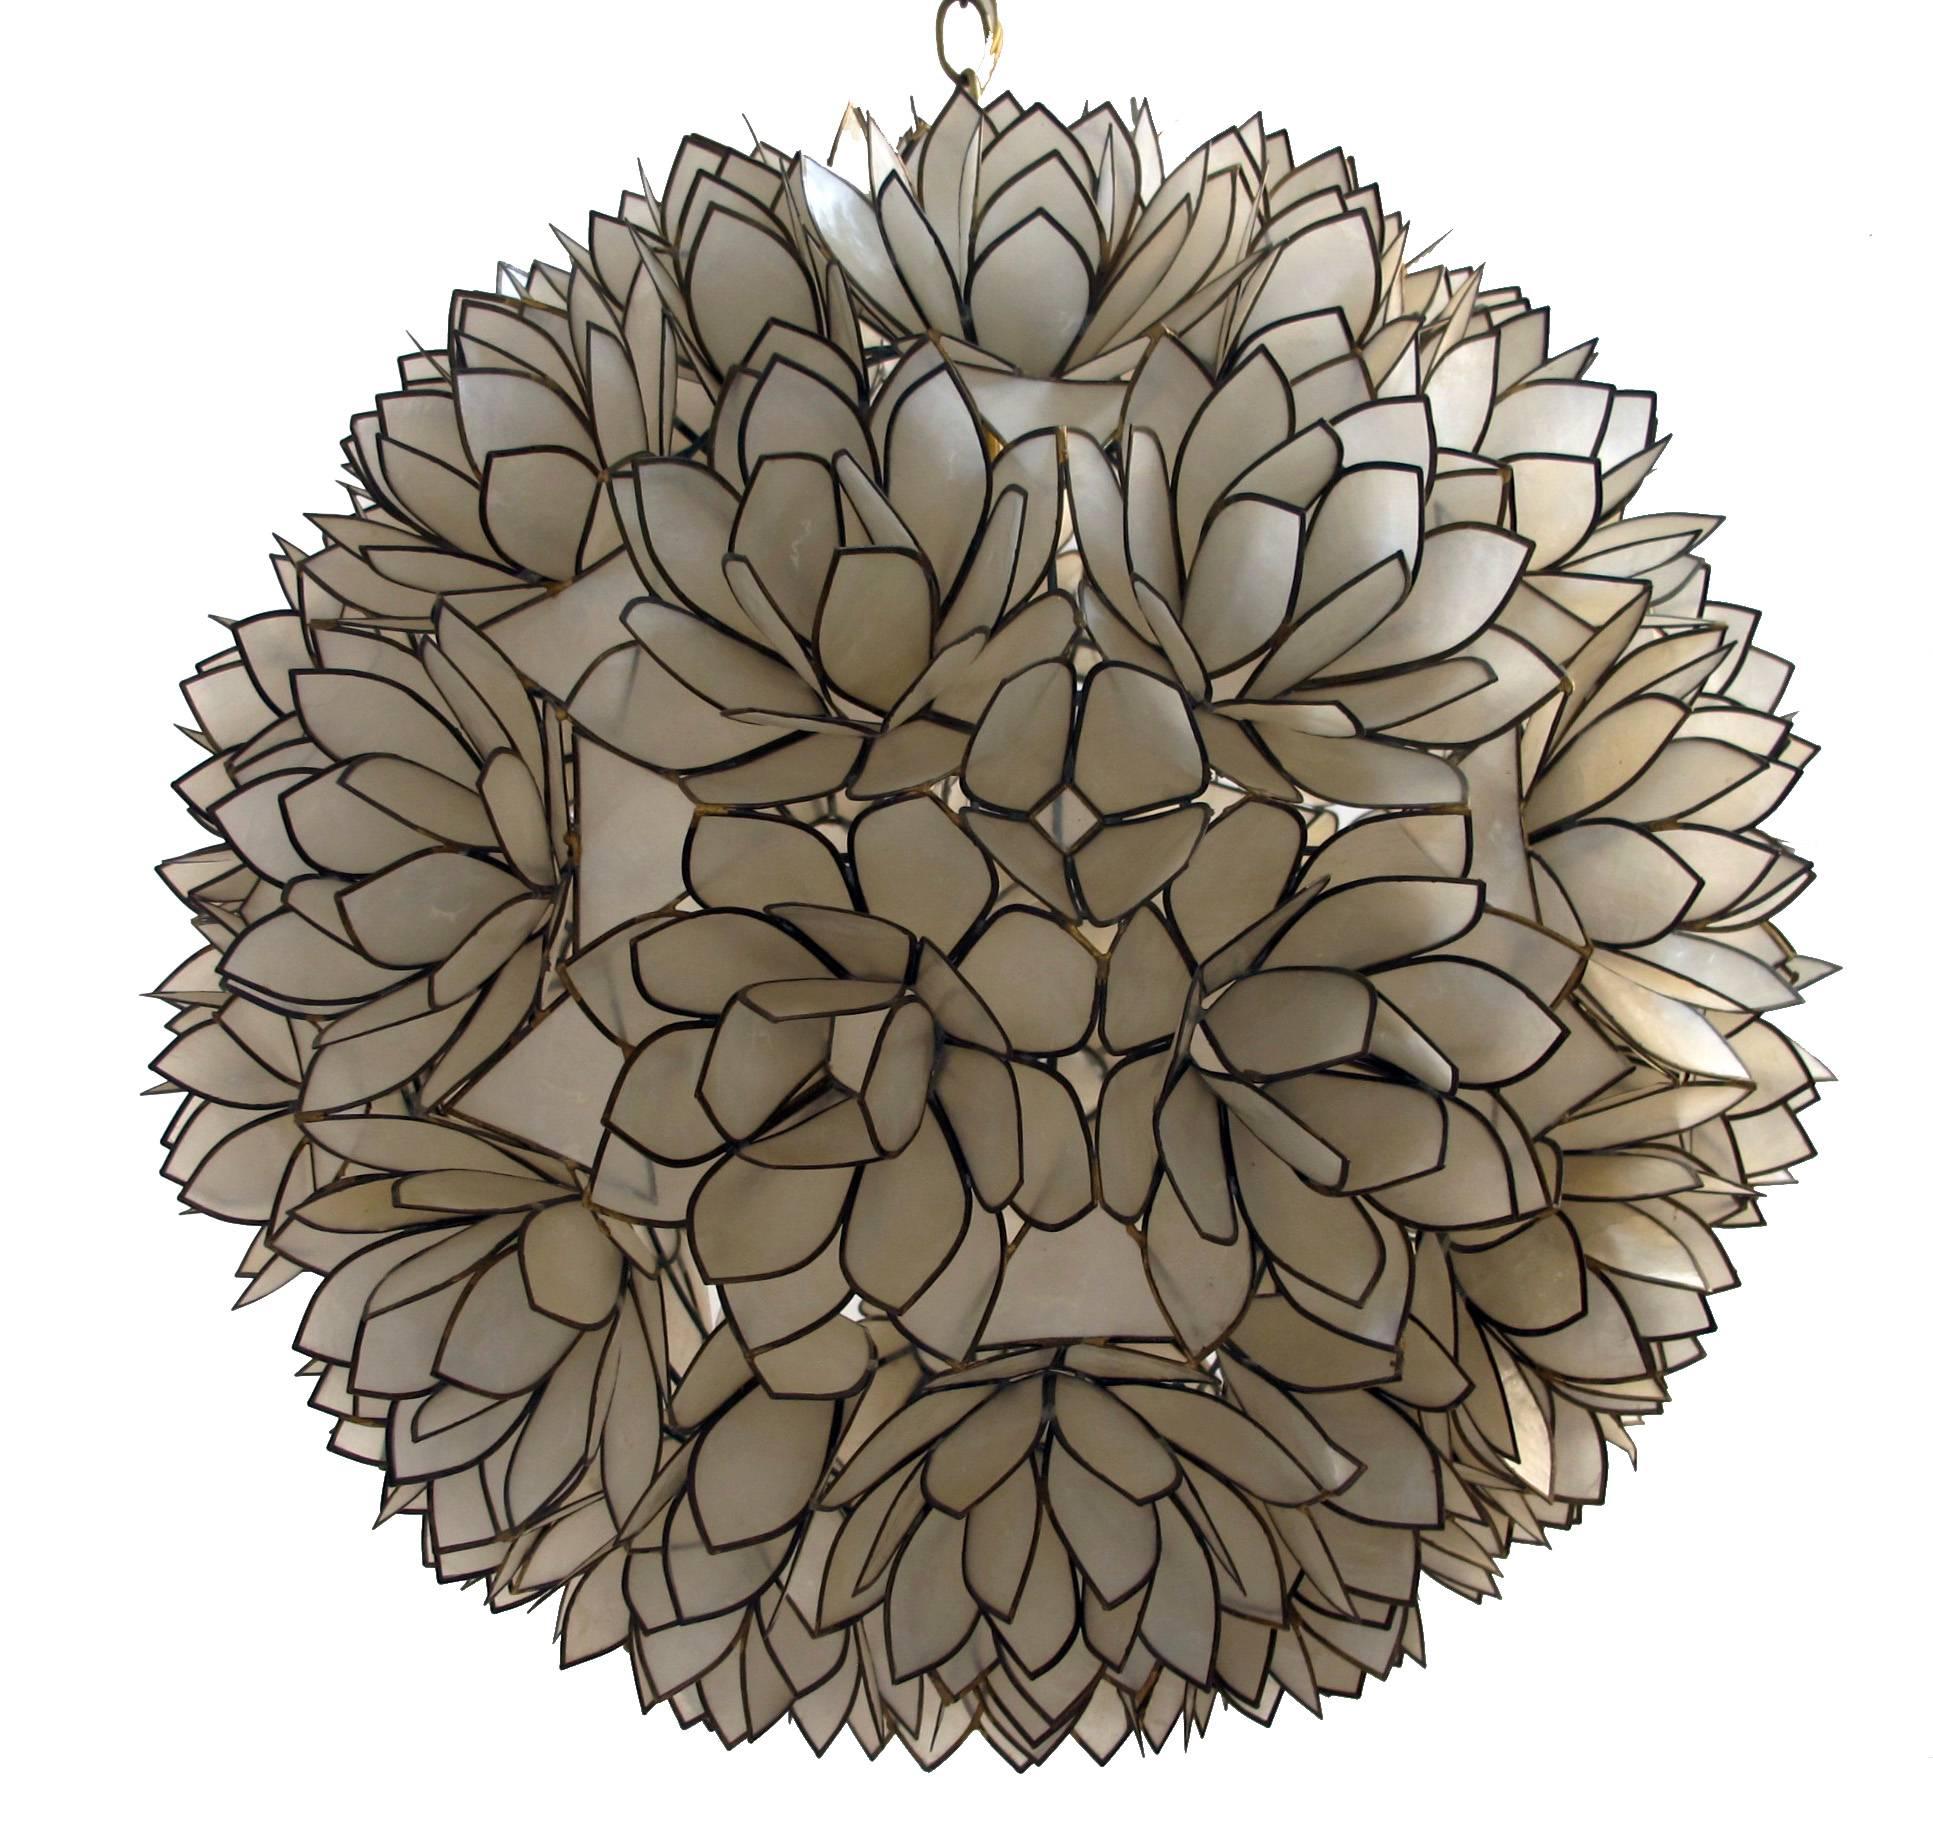 A mid-20th century large sphere shaped or flower form capiz shell hanging pendant light fixture. Newly re-wired and ready for installation. The chain can be shortened or lengthened at no extra cost. Measurements below are for the sphere only.